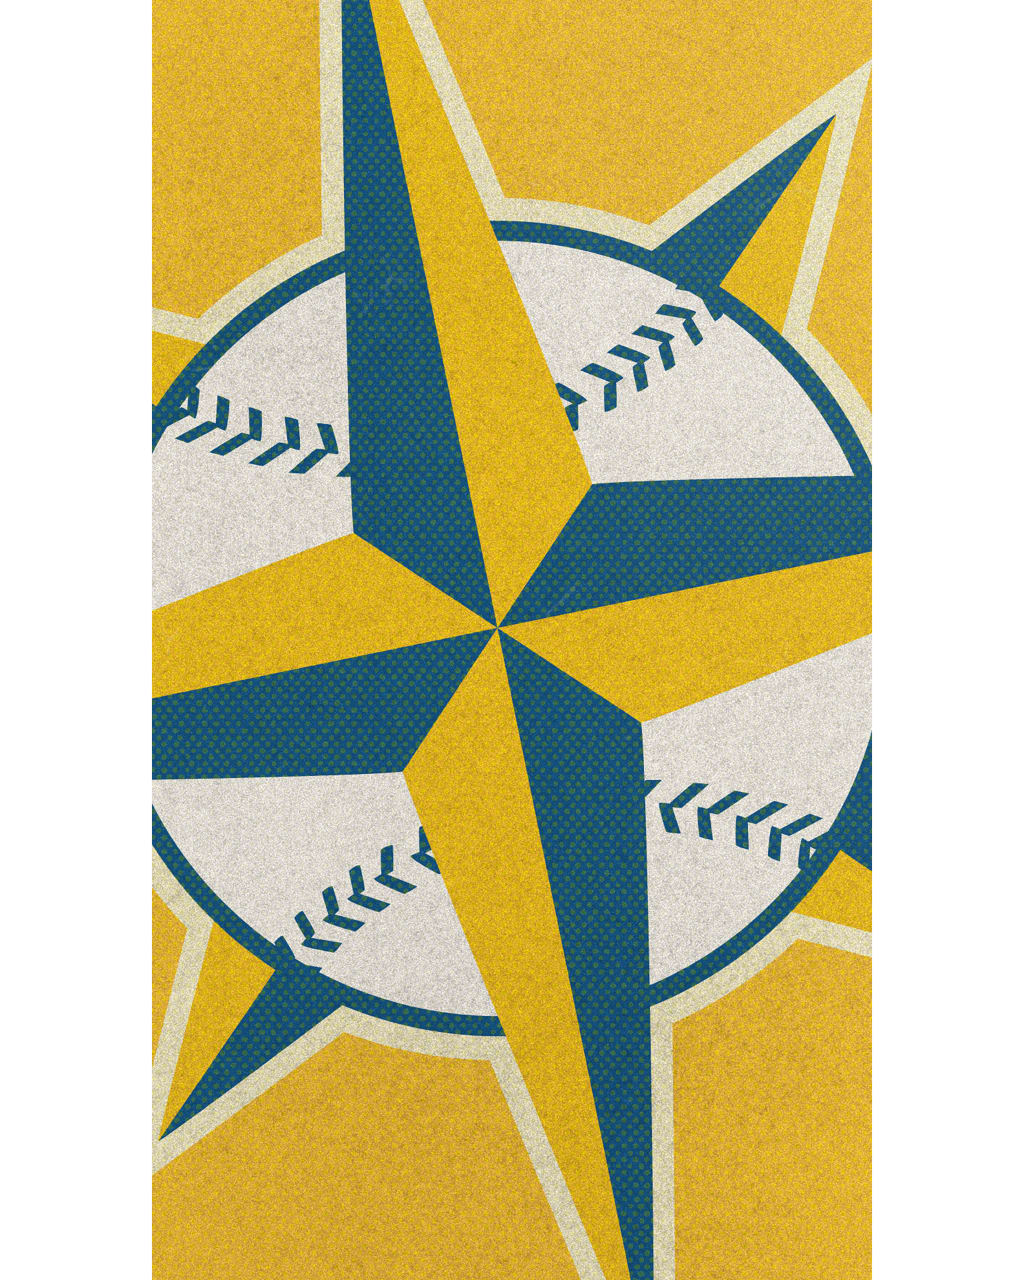 Seattle Mariners wallpaper by Densports - Download on ZEDGE™